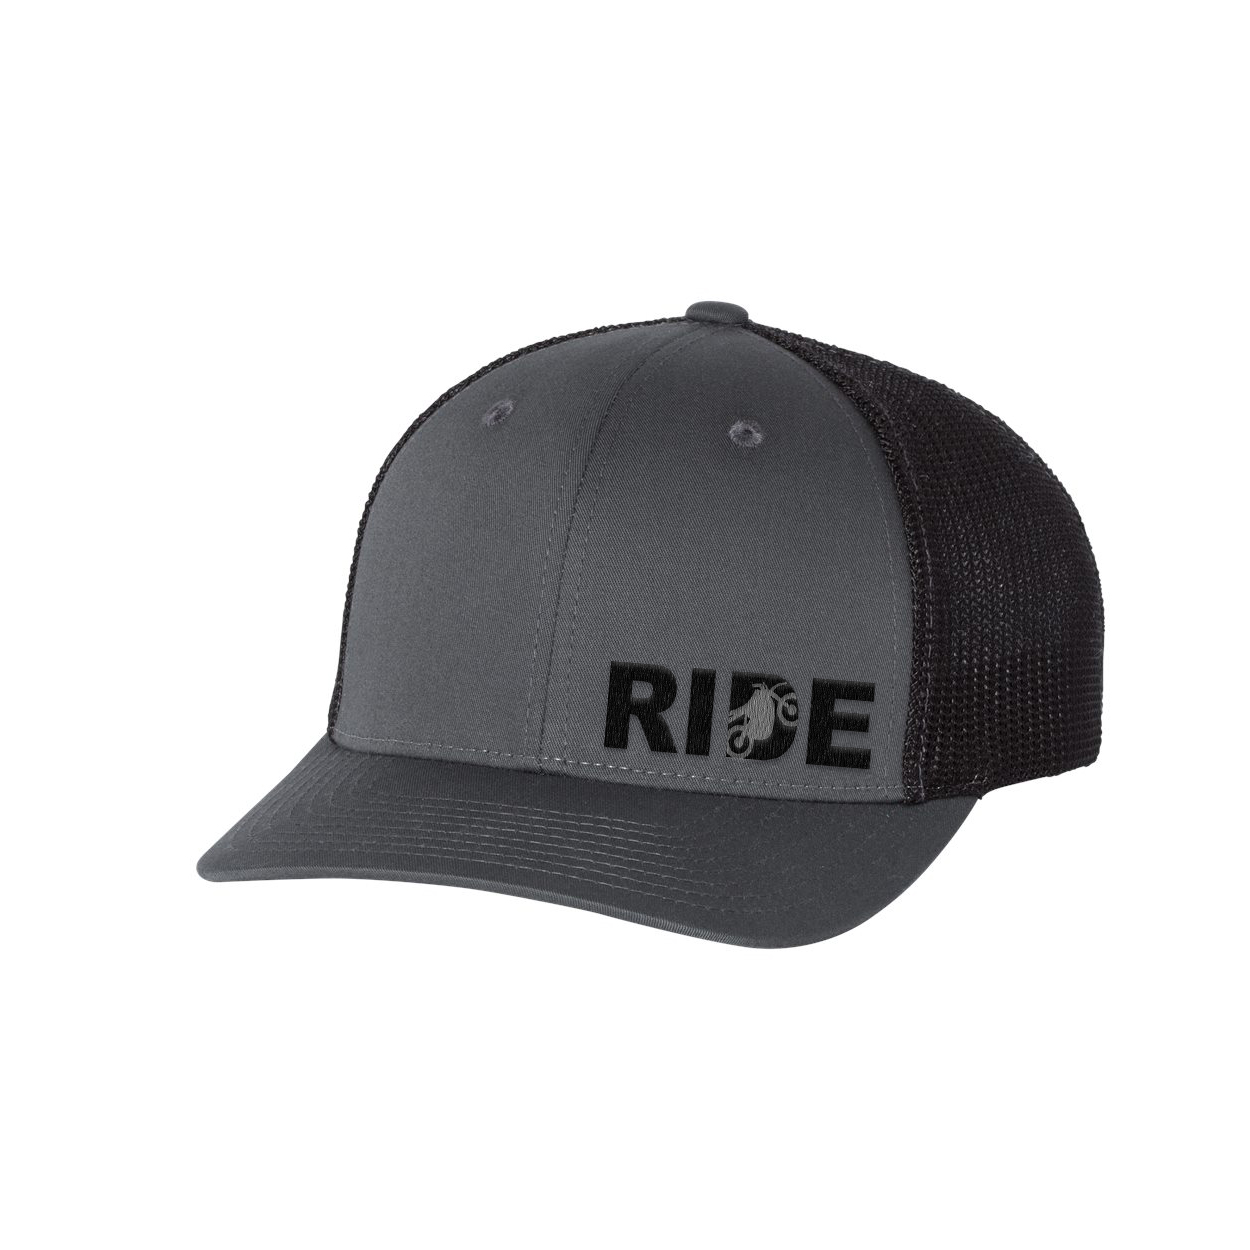 Ride Moto Logo Classic Pro Night Out Embroidered Snapback Trucker Hat Gray/Black